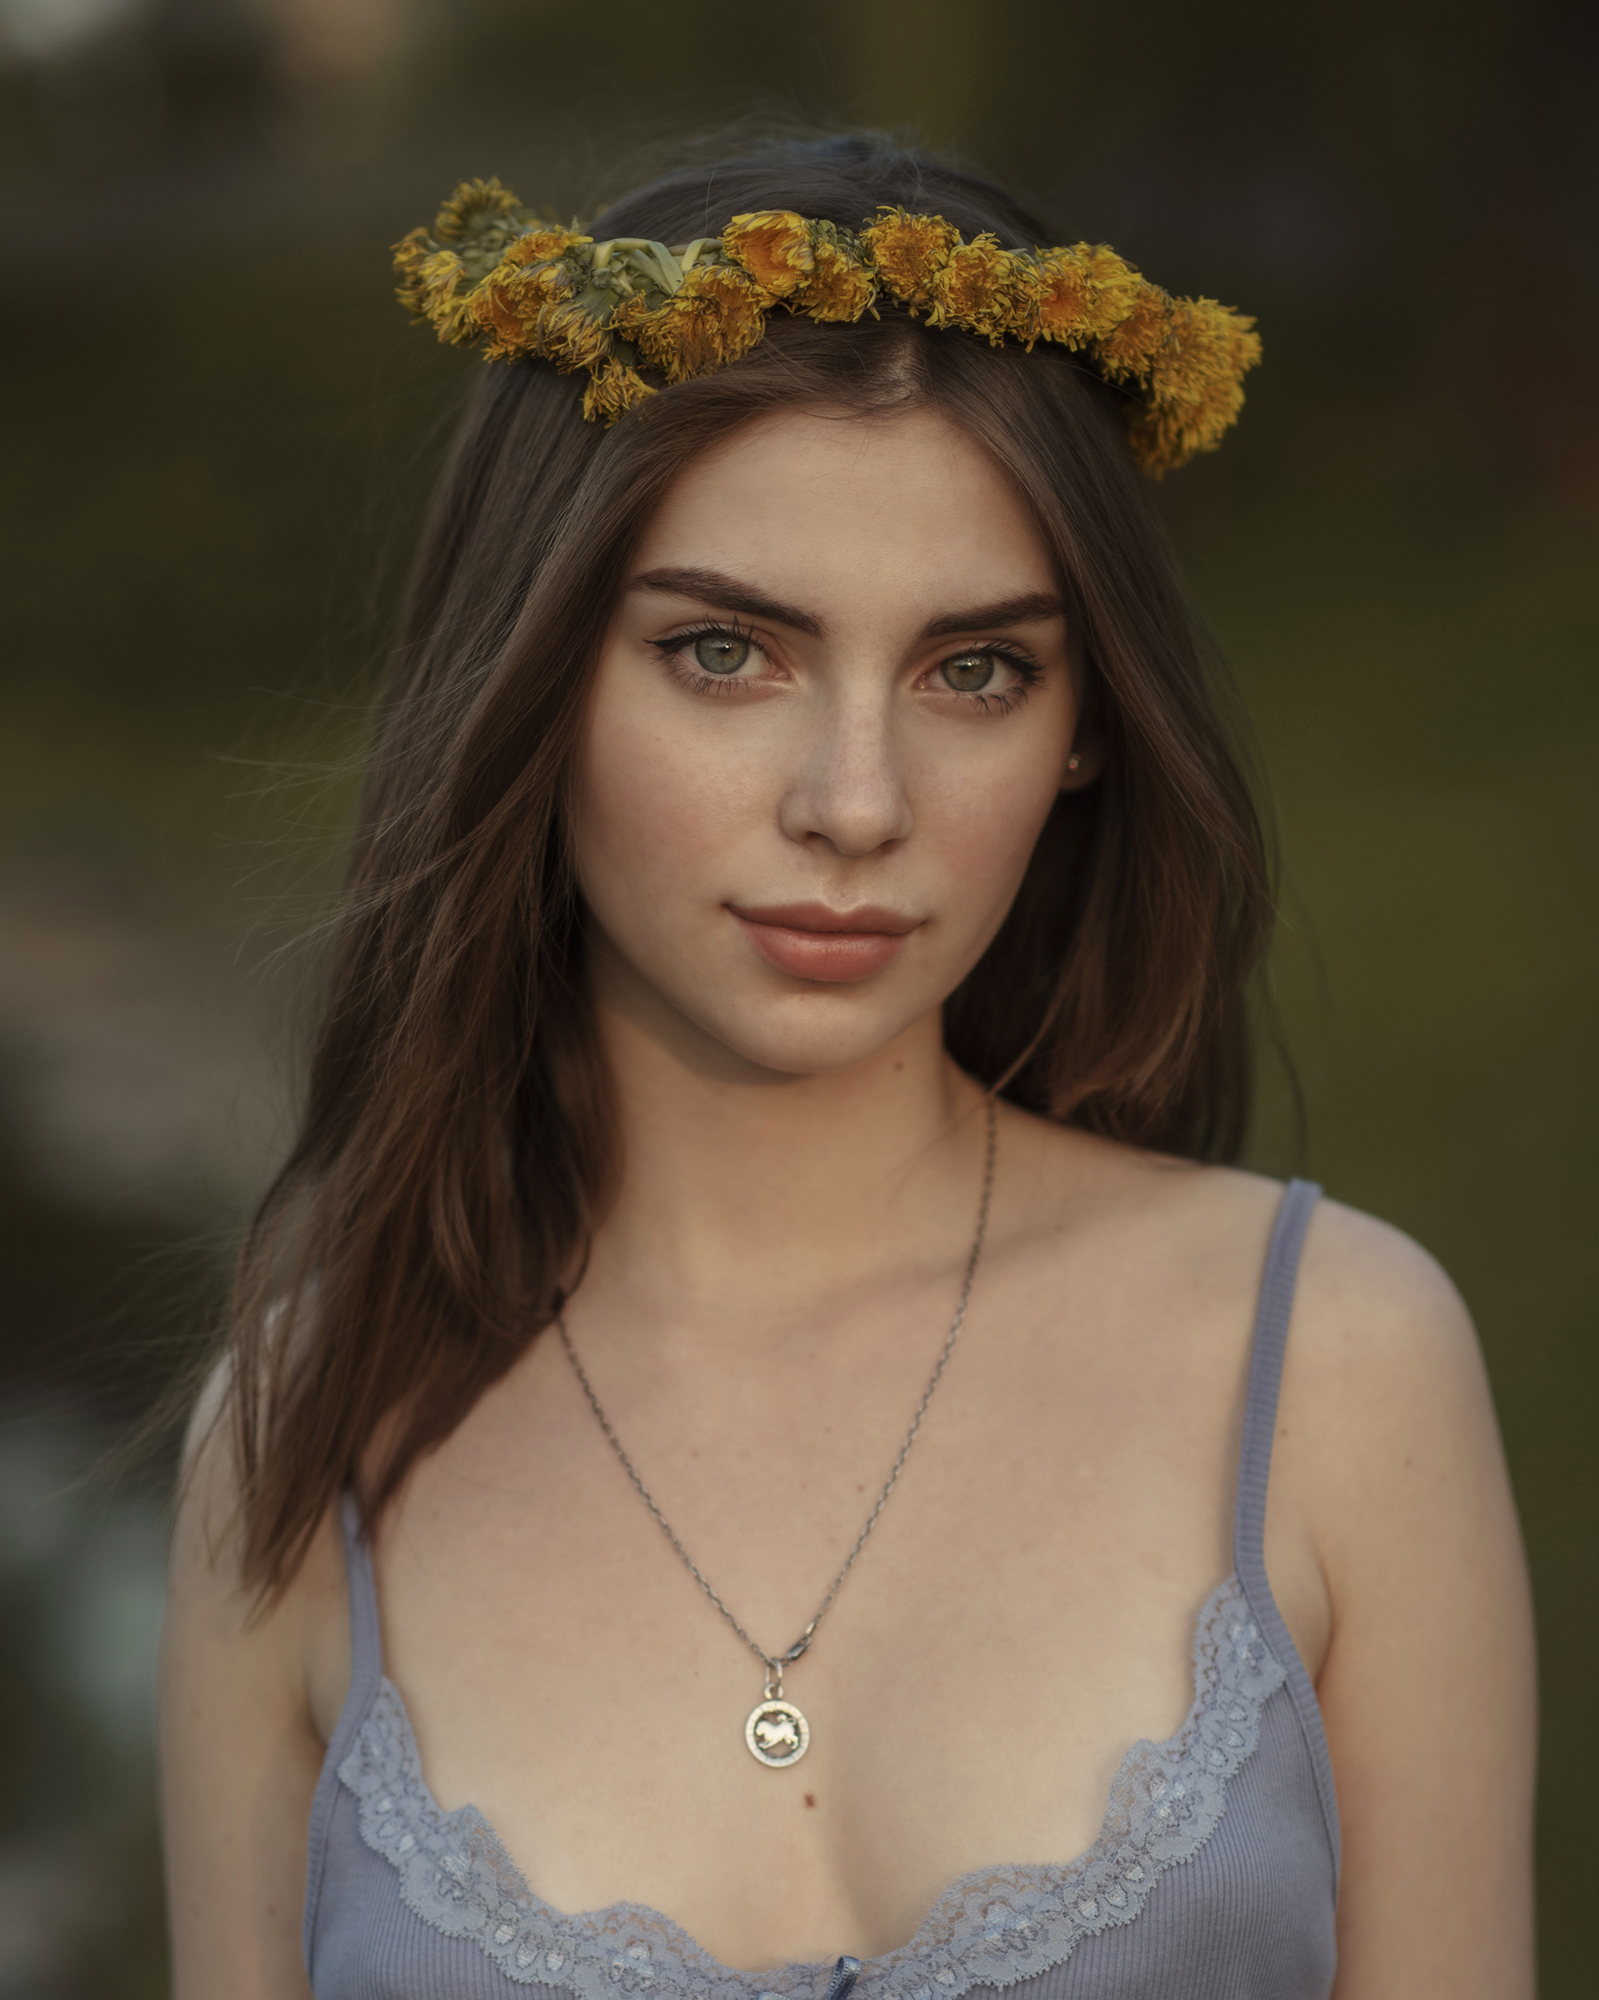 Women Outdoors Brunette Looking At Viewer Face Necklace Bare Shoulders Green Eyes Depth Of Field Por 1599x2000